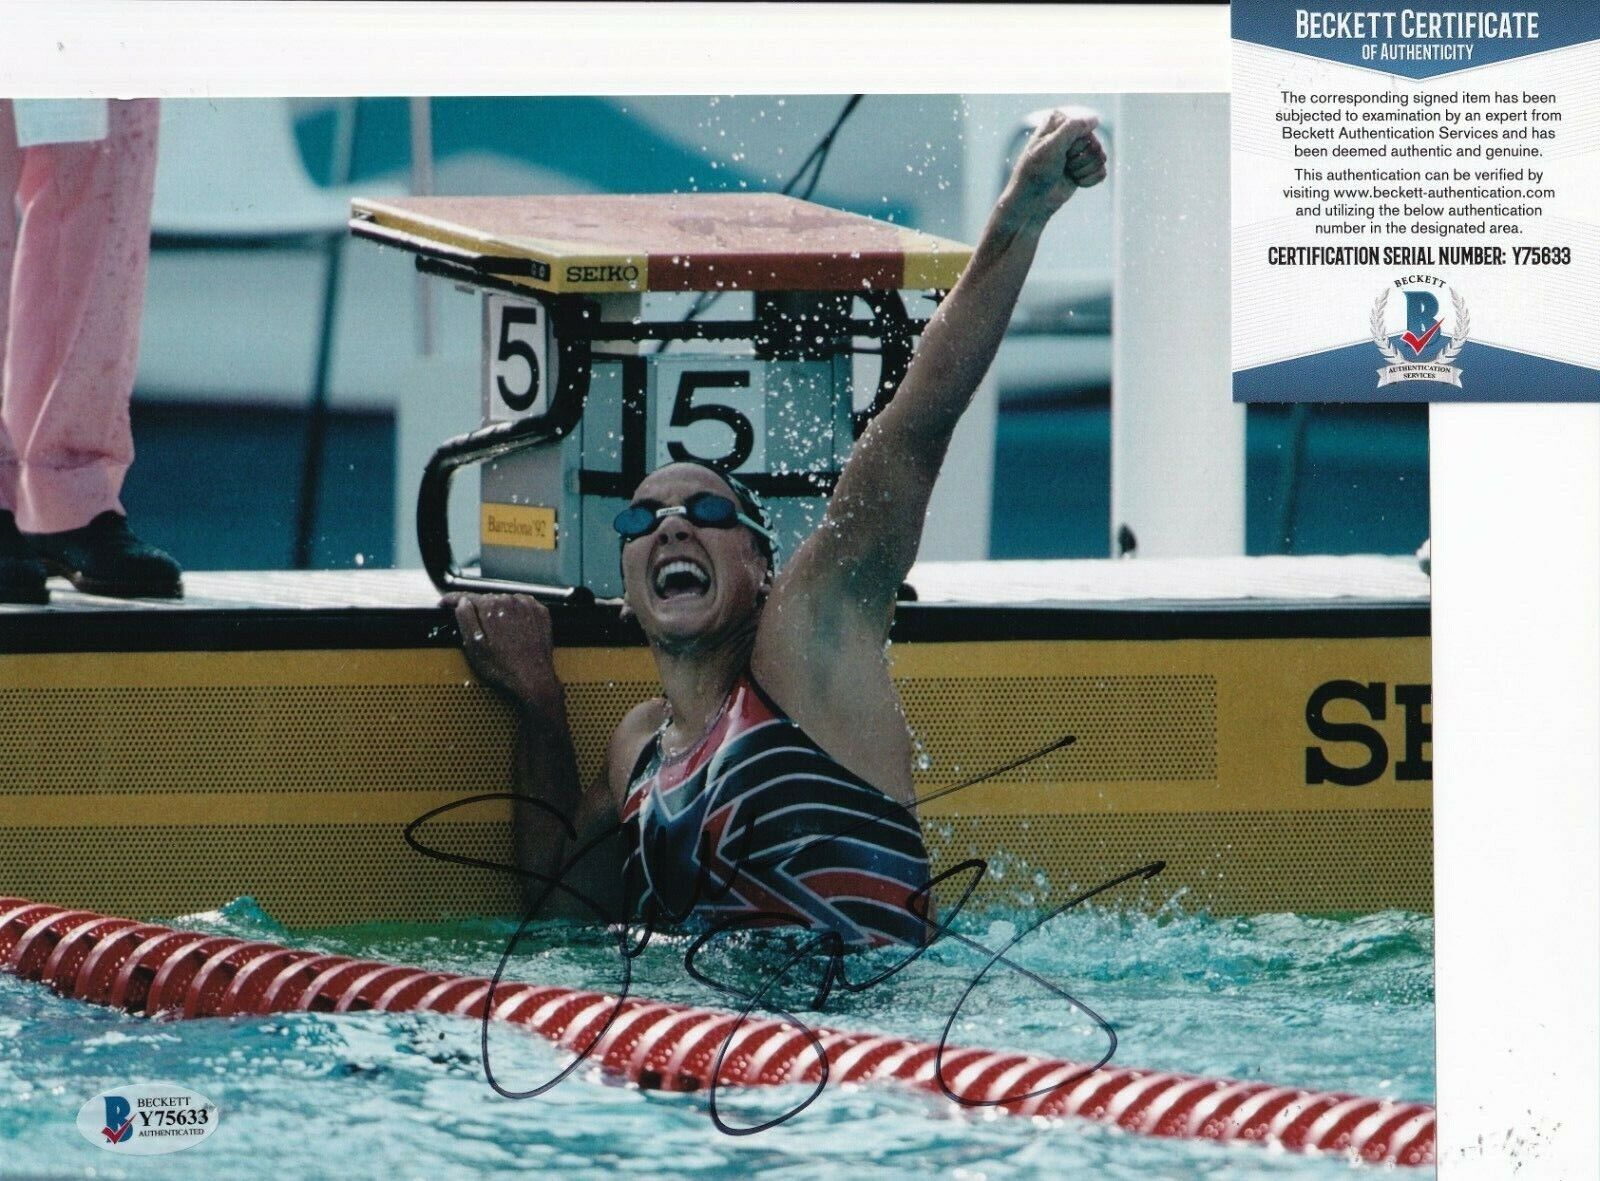 SUMMER SANDERS signed (USA OLYMPICS) SWIMMING Stanford 8X10 Photo Poster painting BECKETT Y75633